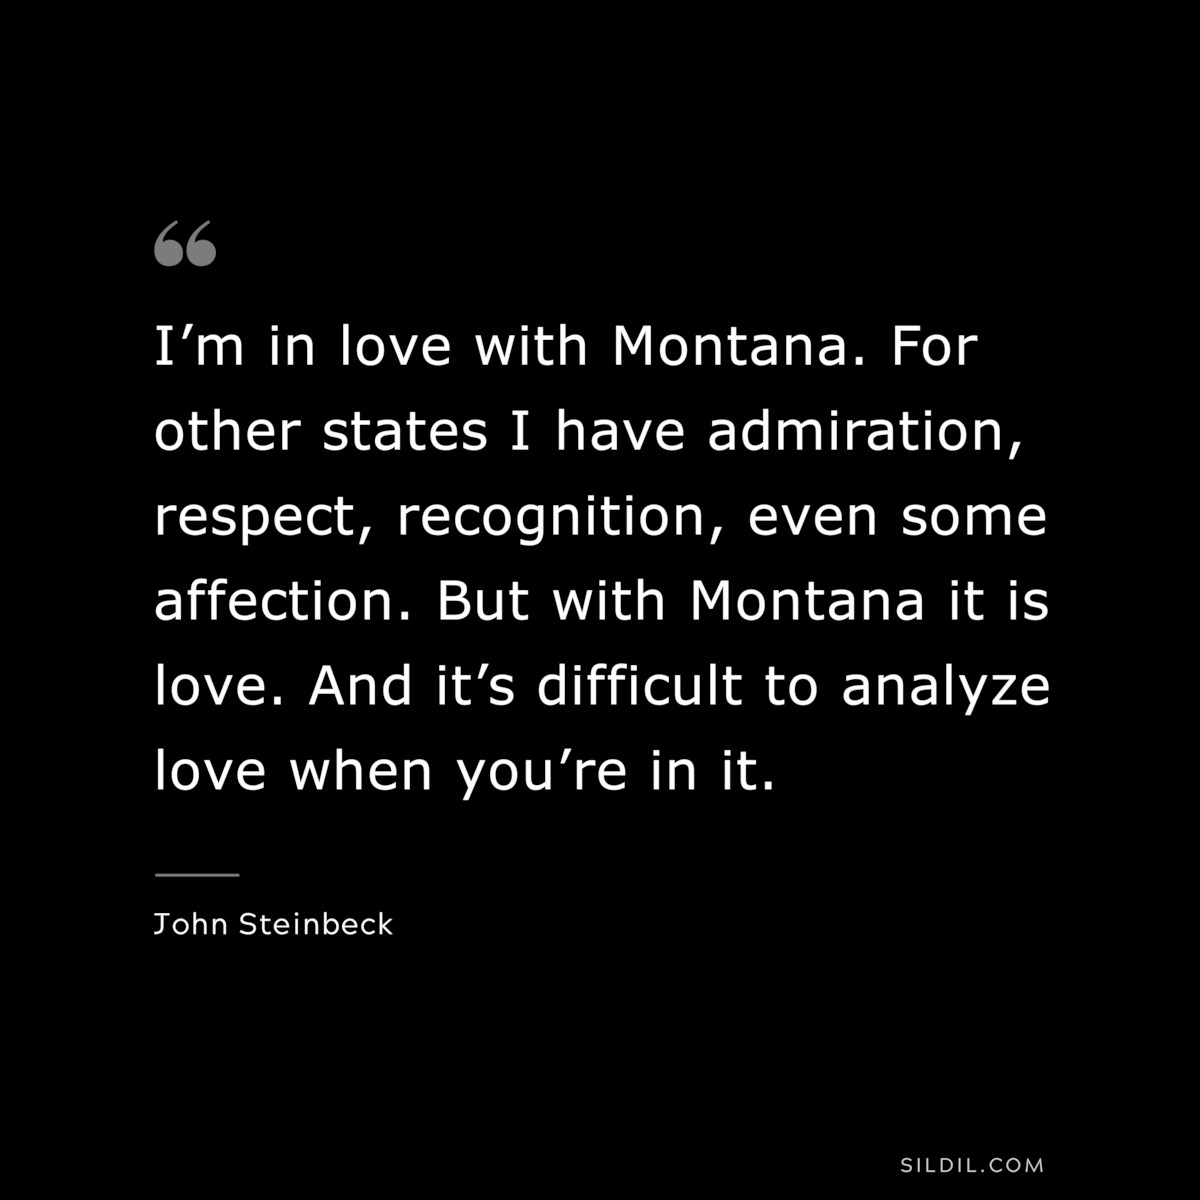 I’m in love with Montana. For other states I have admiration, respect, recognition, even some affection. But with Montana it is love. And it’s difficult to analyze love when you’re in it.― John Steinbeck